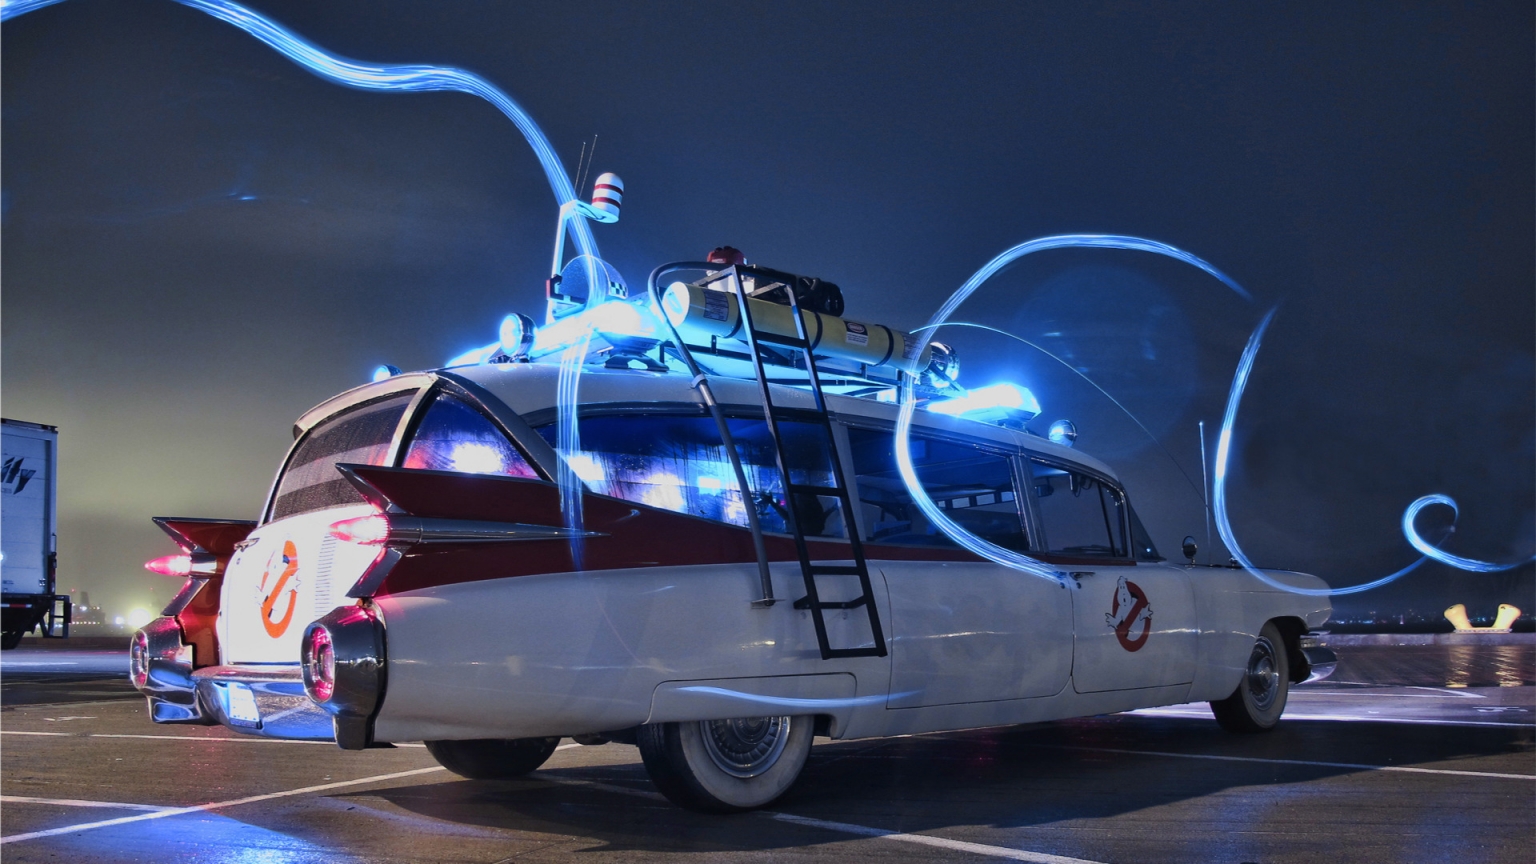 Ghostbusters Car for 1536 x 864 HDTV resolution